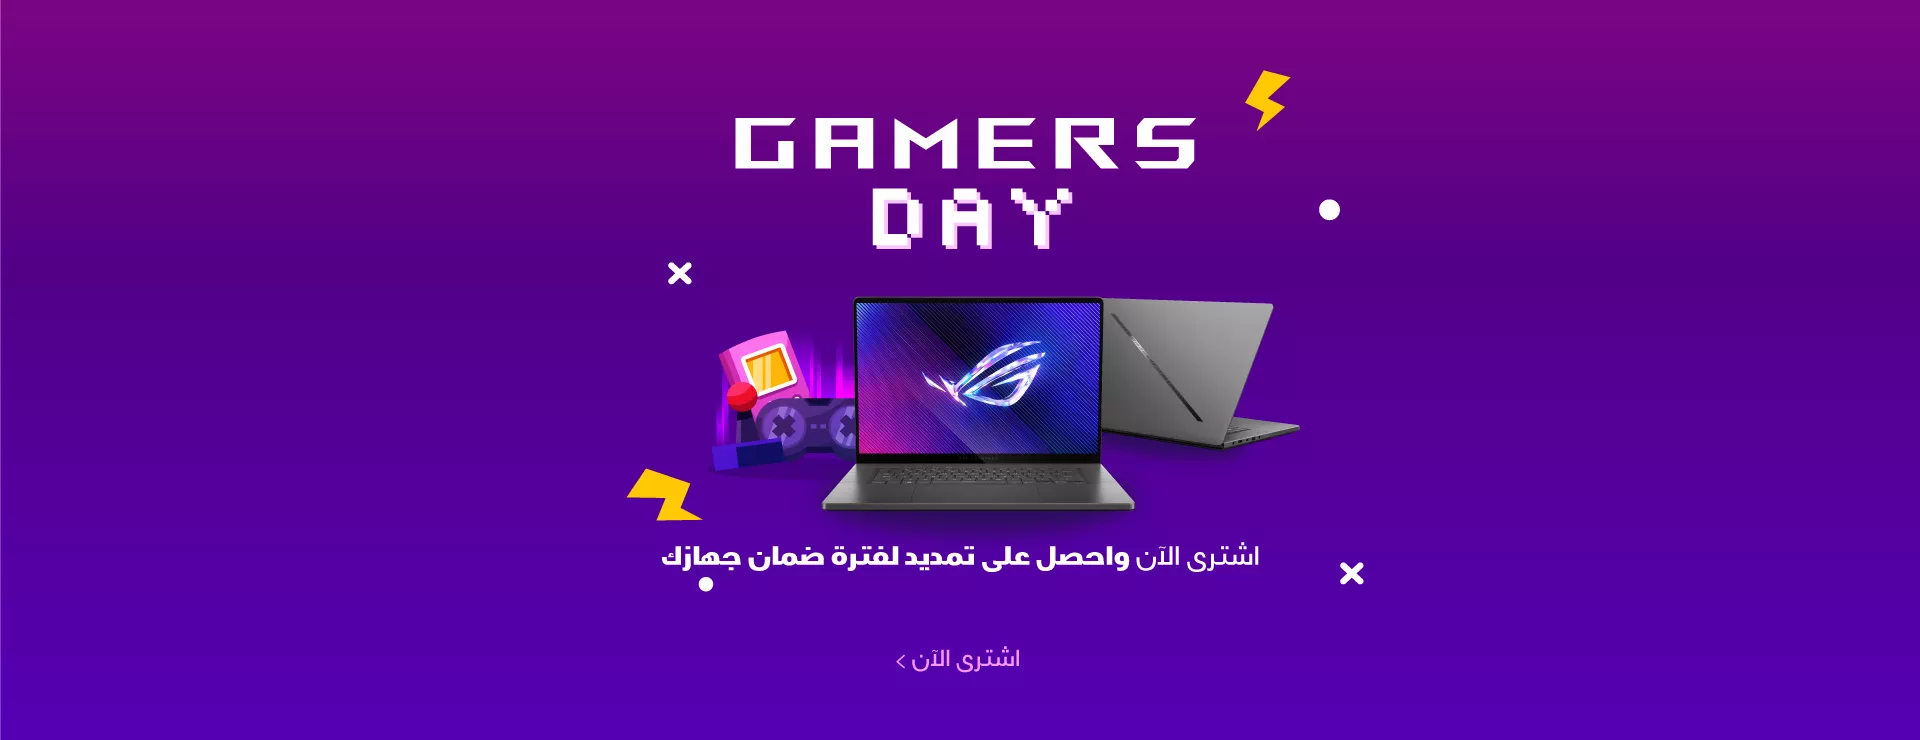 Republic of gamers day